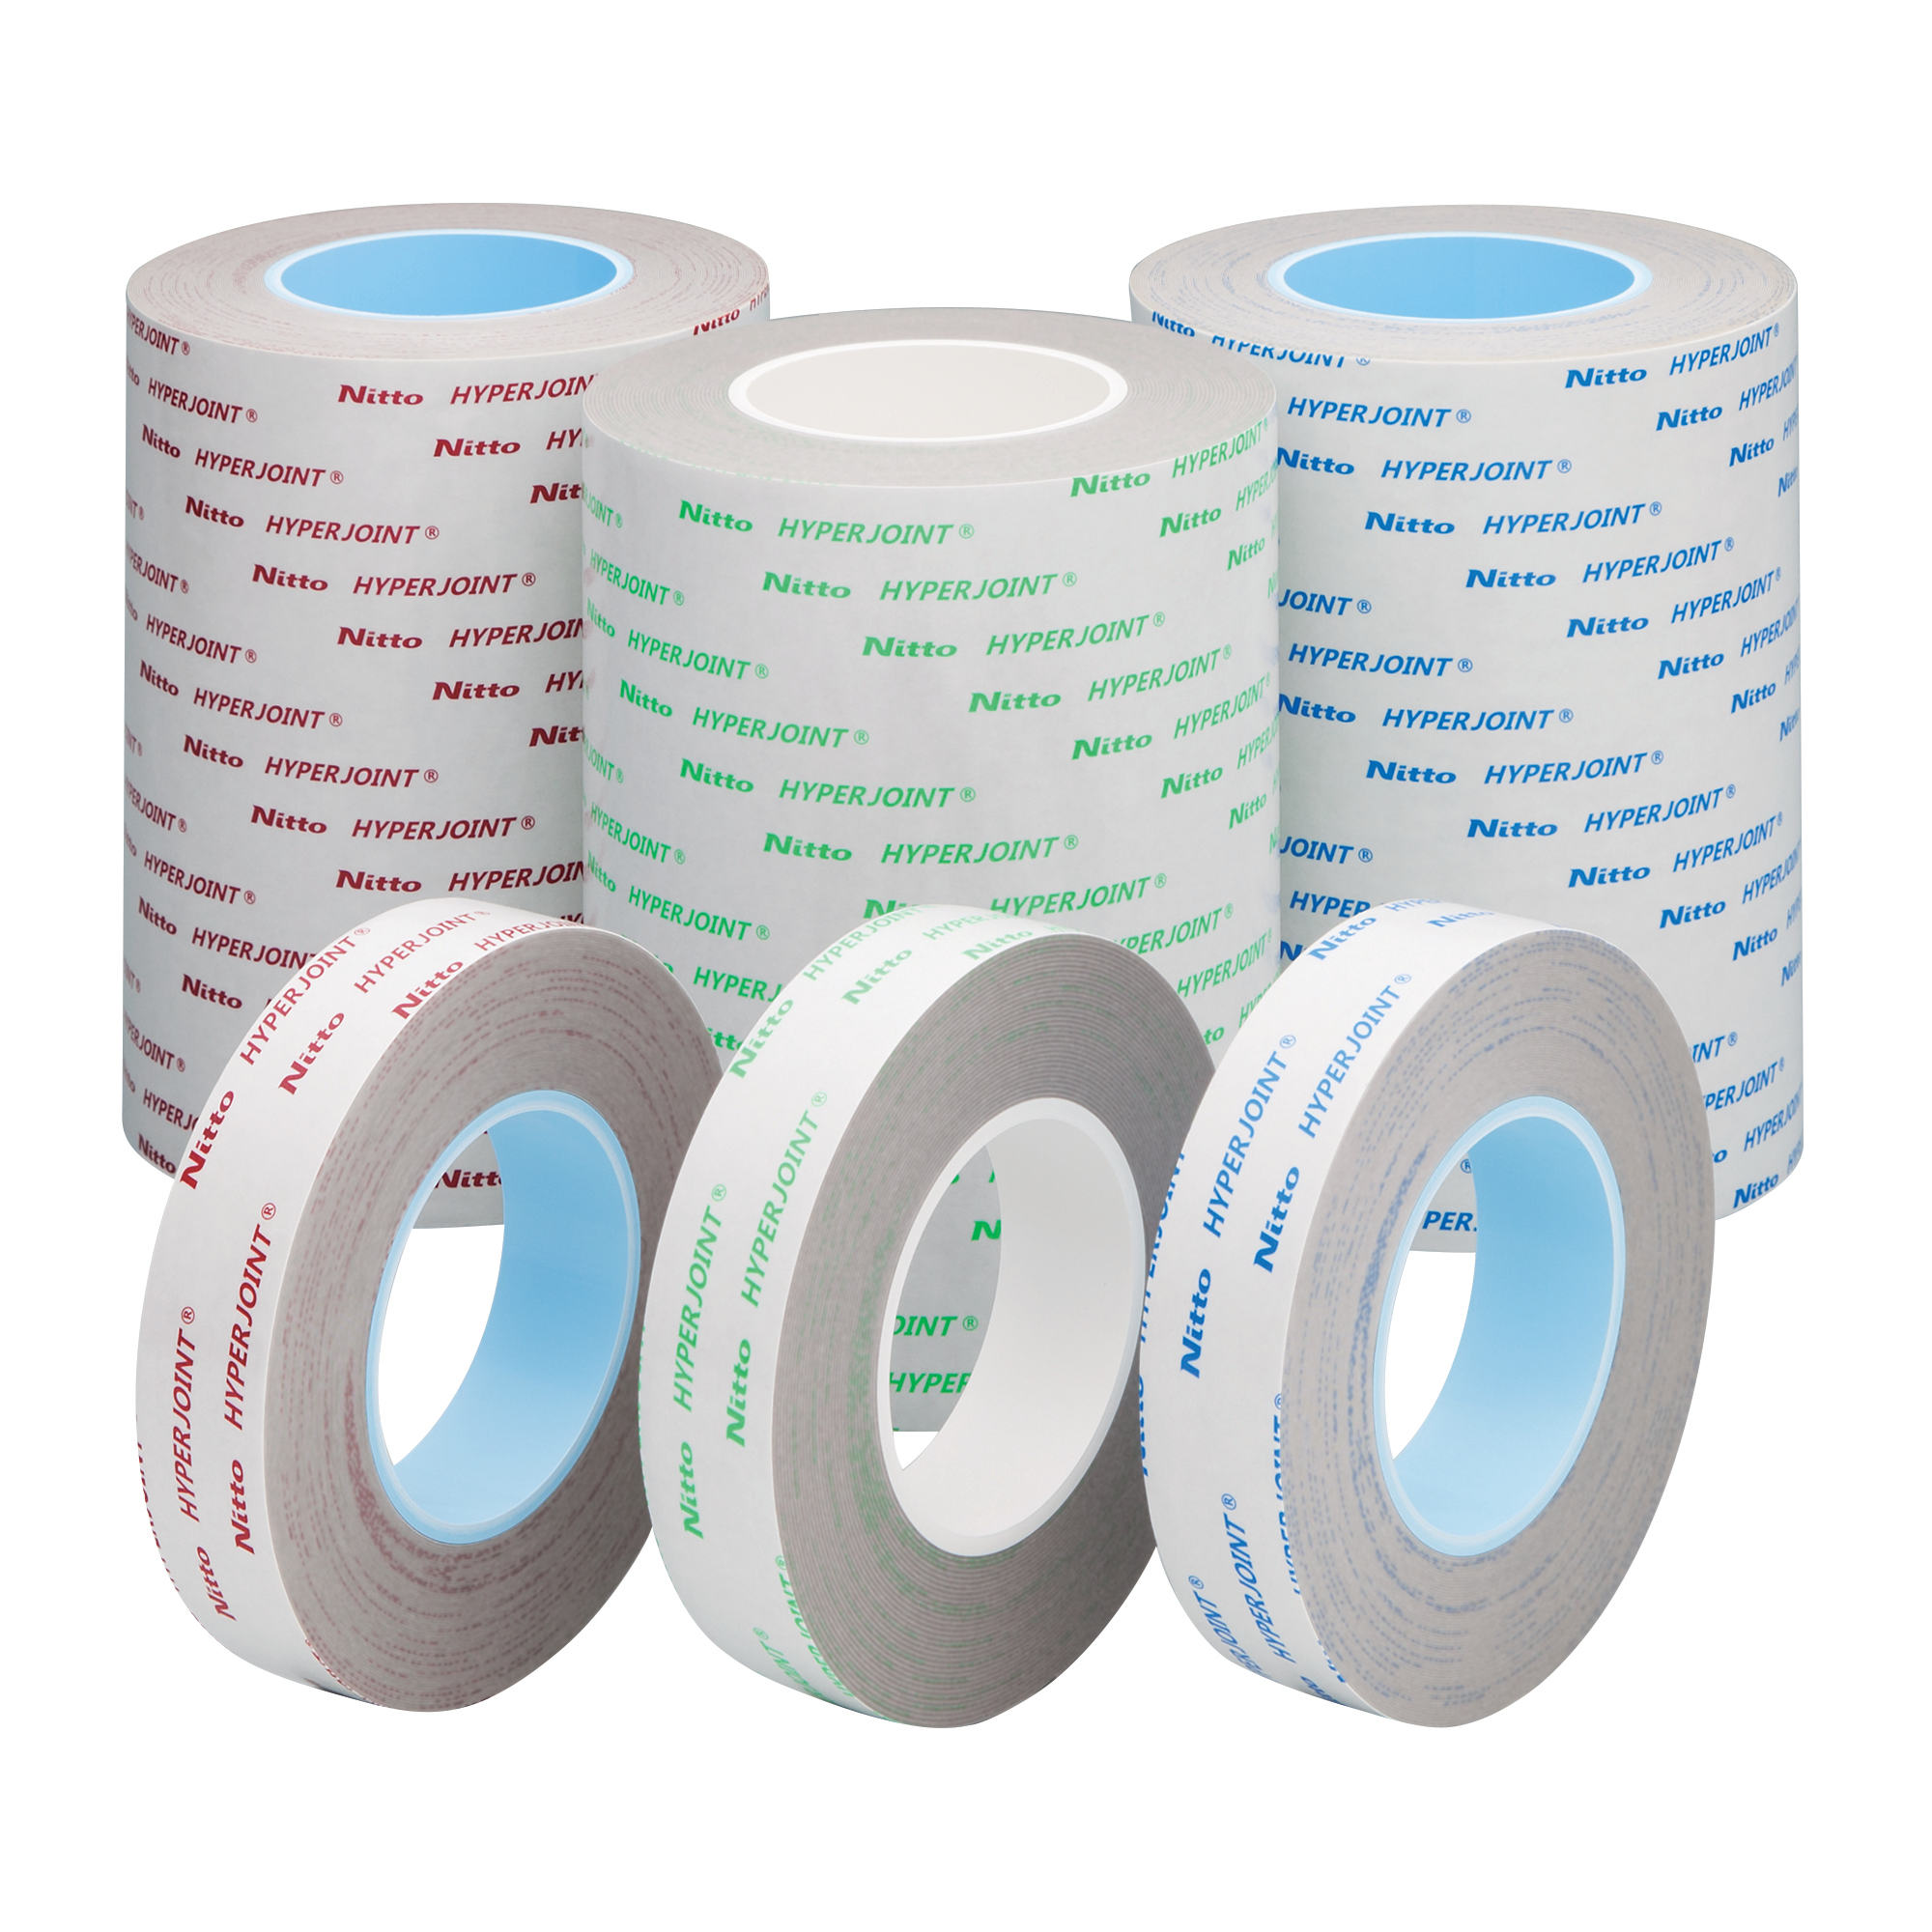  hAnduO Strong Double Sided Tape Adhesives Sealers Tape